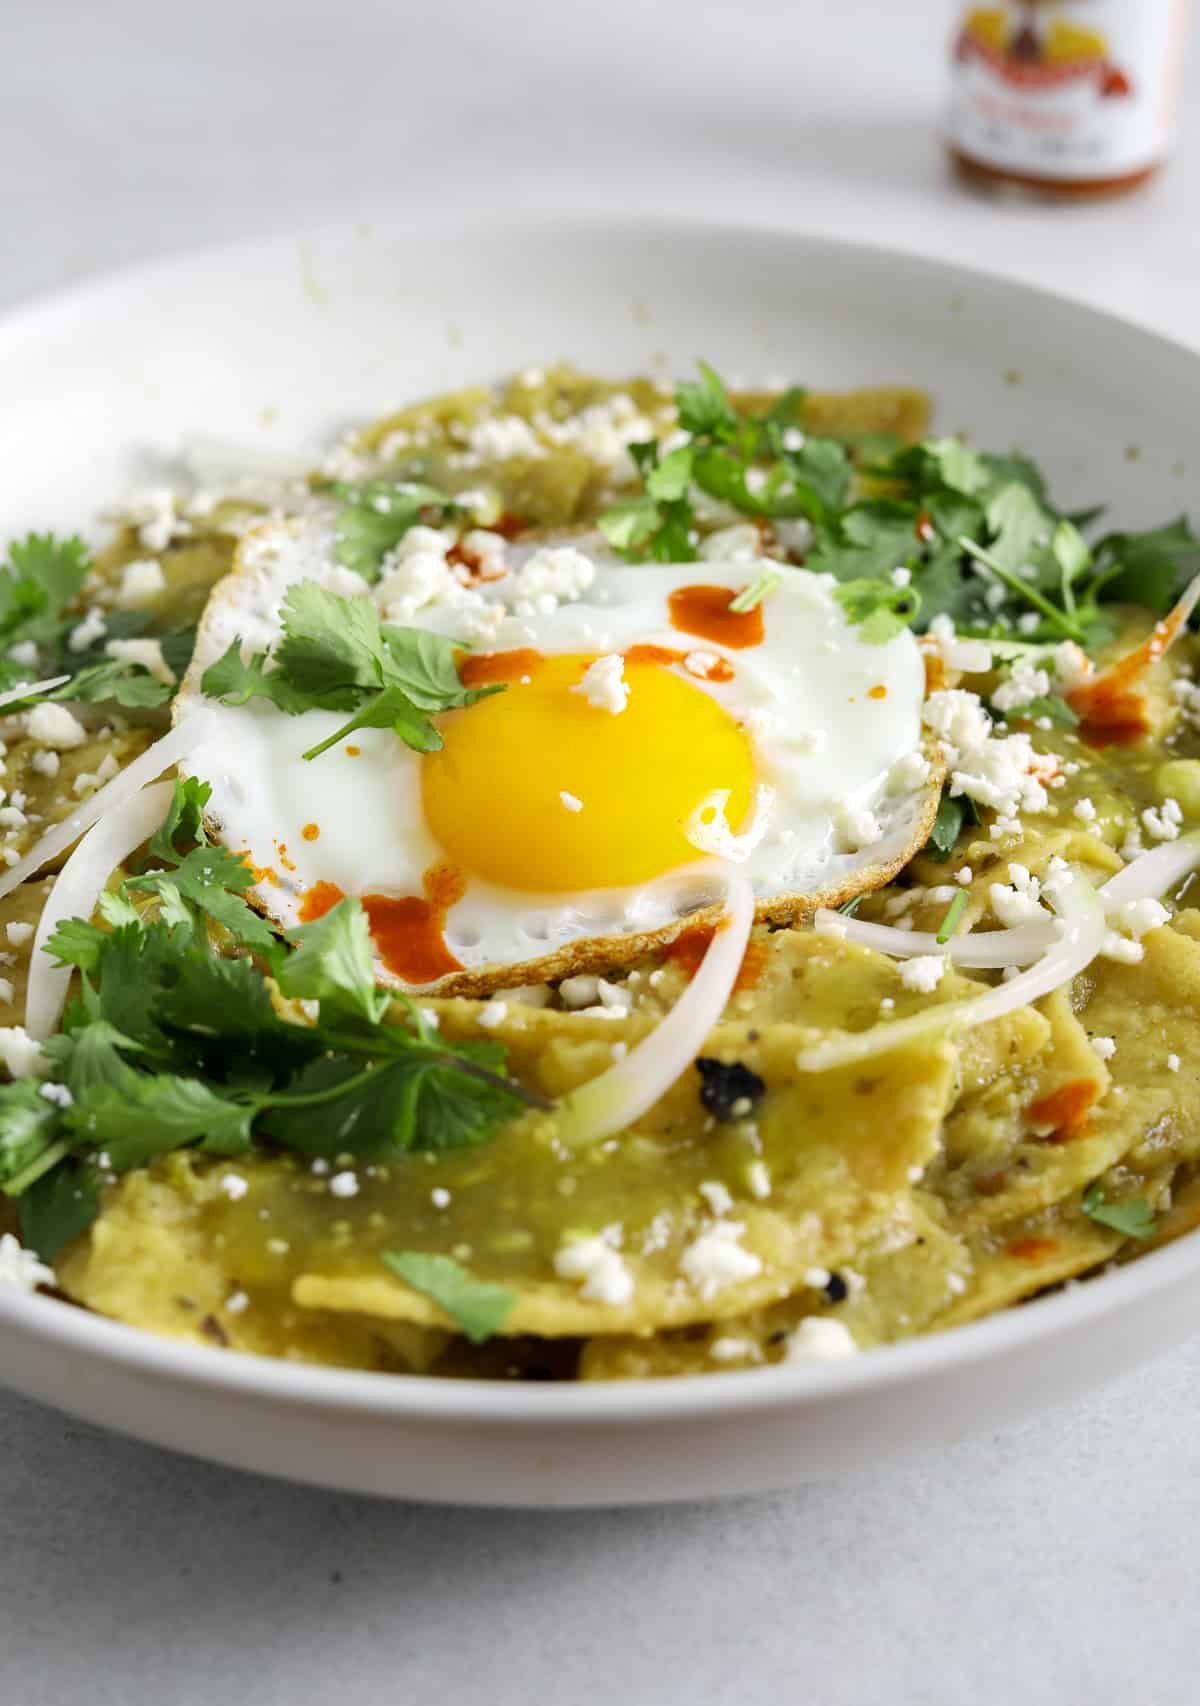 A white ceramic bowl filled with chilaquiles, salsa verde, cilantro, crumbled cheese and a sunny side up egg.